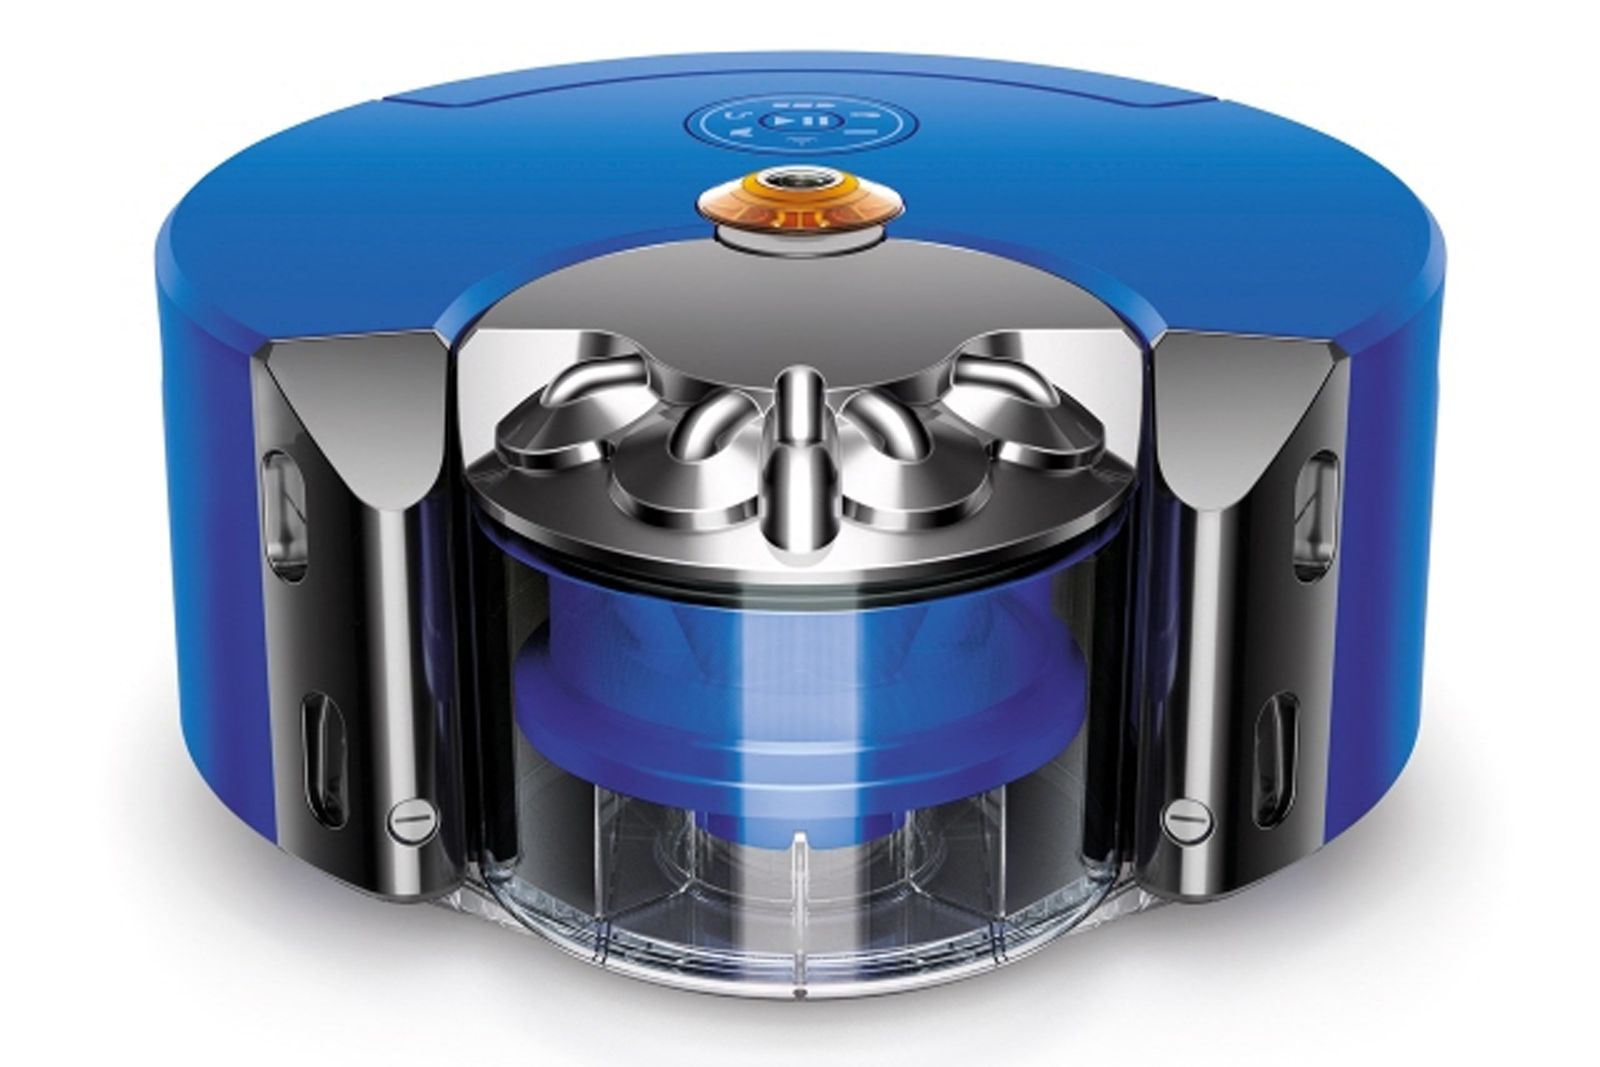 The second-gen Dyson 360 Heurist robot vac finally makes it to the UK image 2